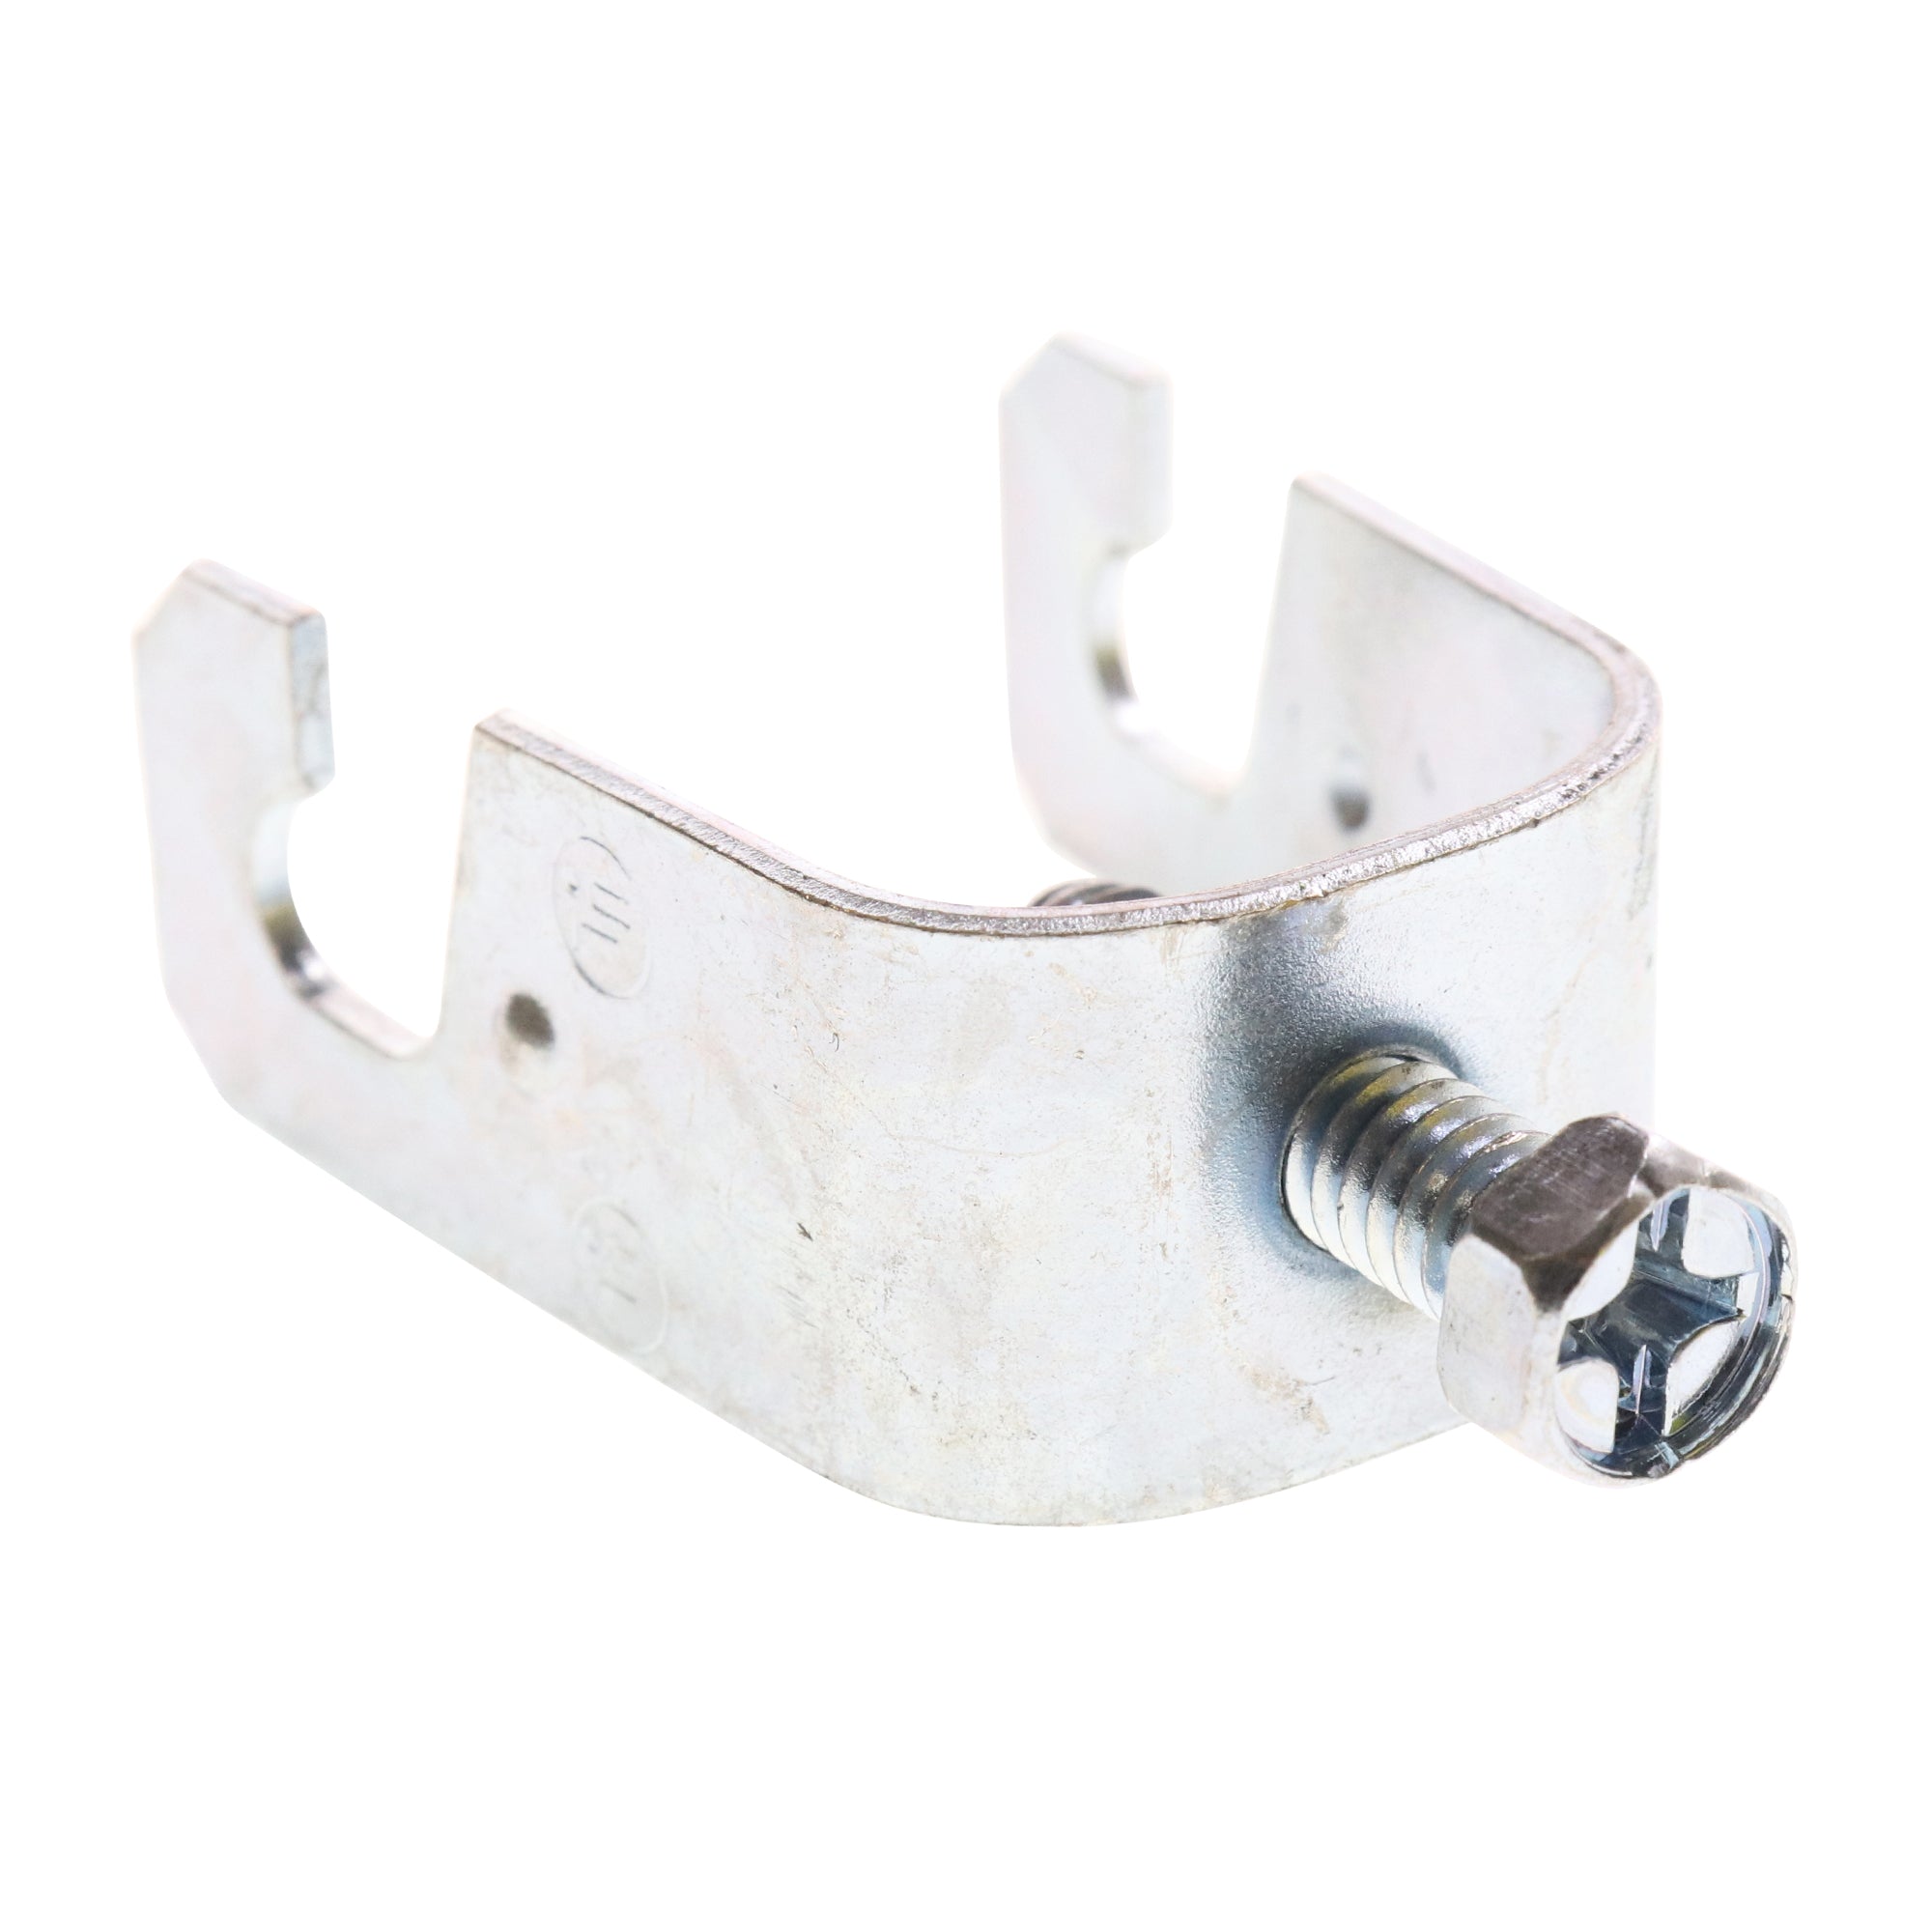 Erico Caddy Cadwal, ERICO CADDY RGC GRID CLAMP, #8-#4 STRANDED WIRE TO 3/4"-1" POST, (100-PACK)